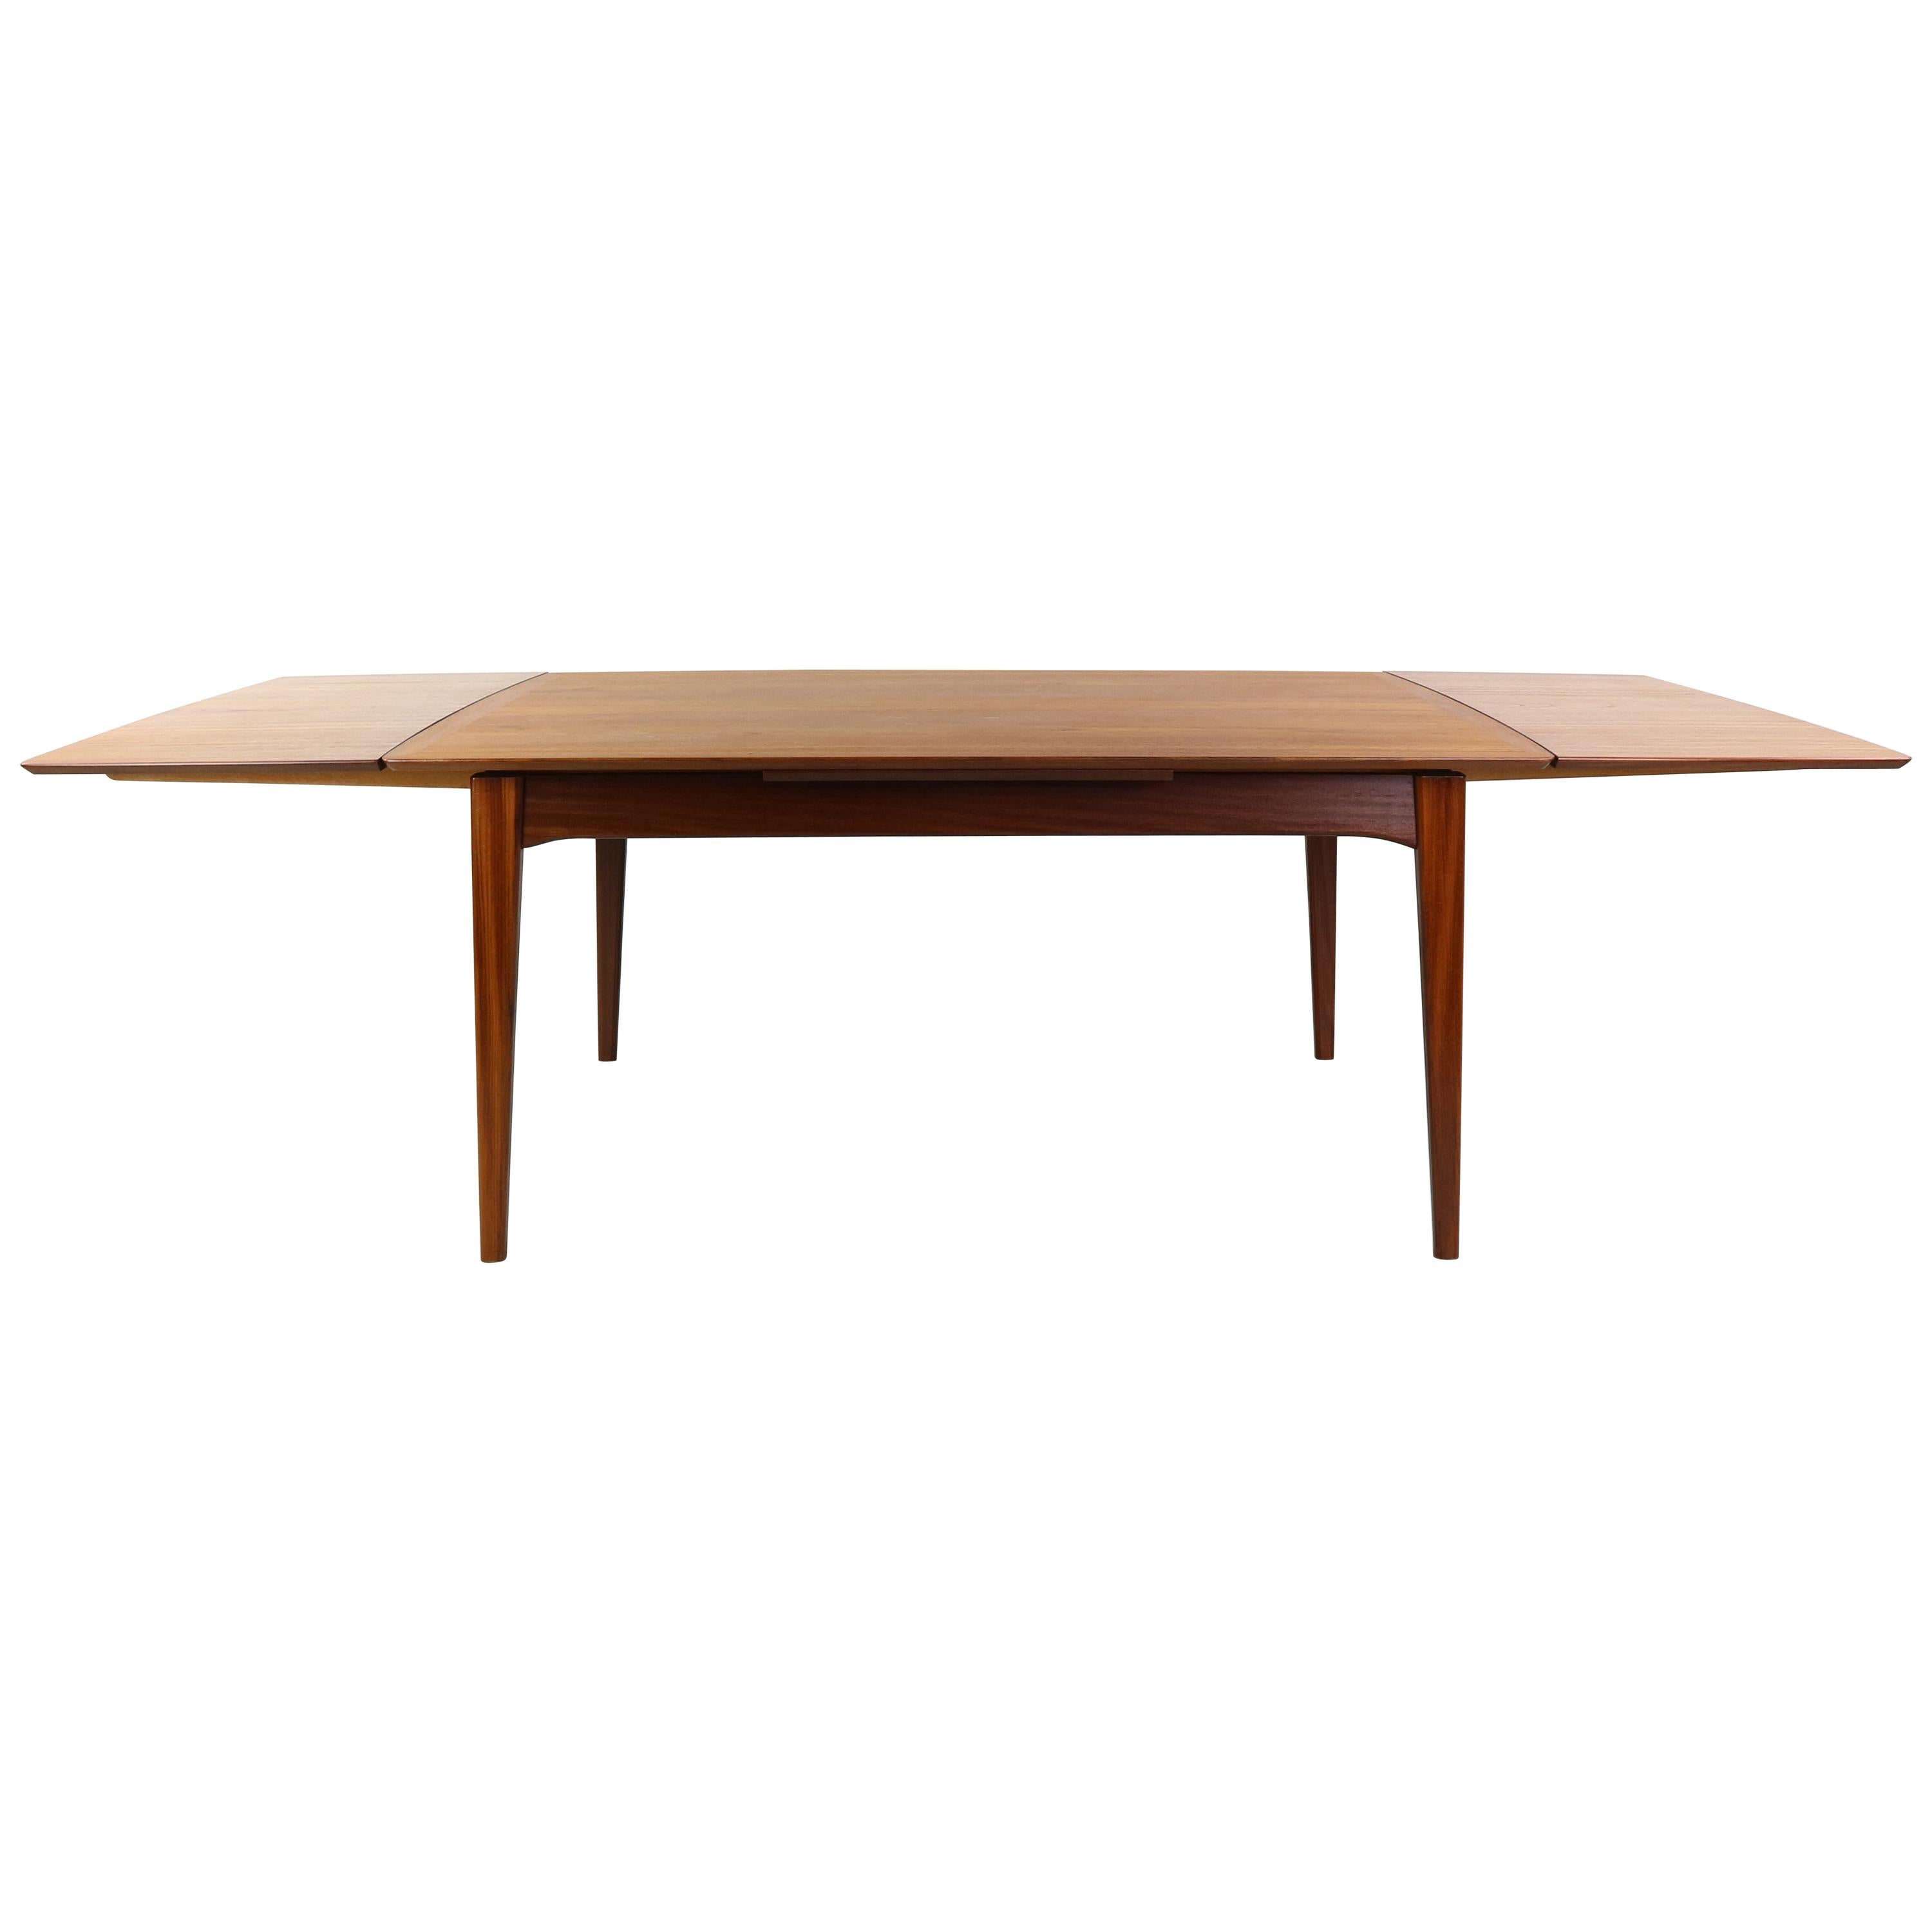 Large Extendable Teak Dining Table by Louis Van Teeffelen for Webe, 1950s